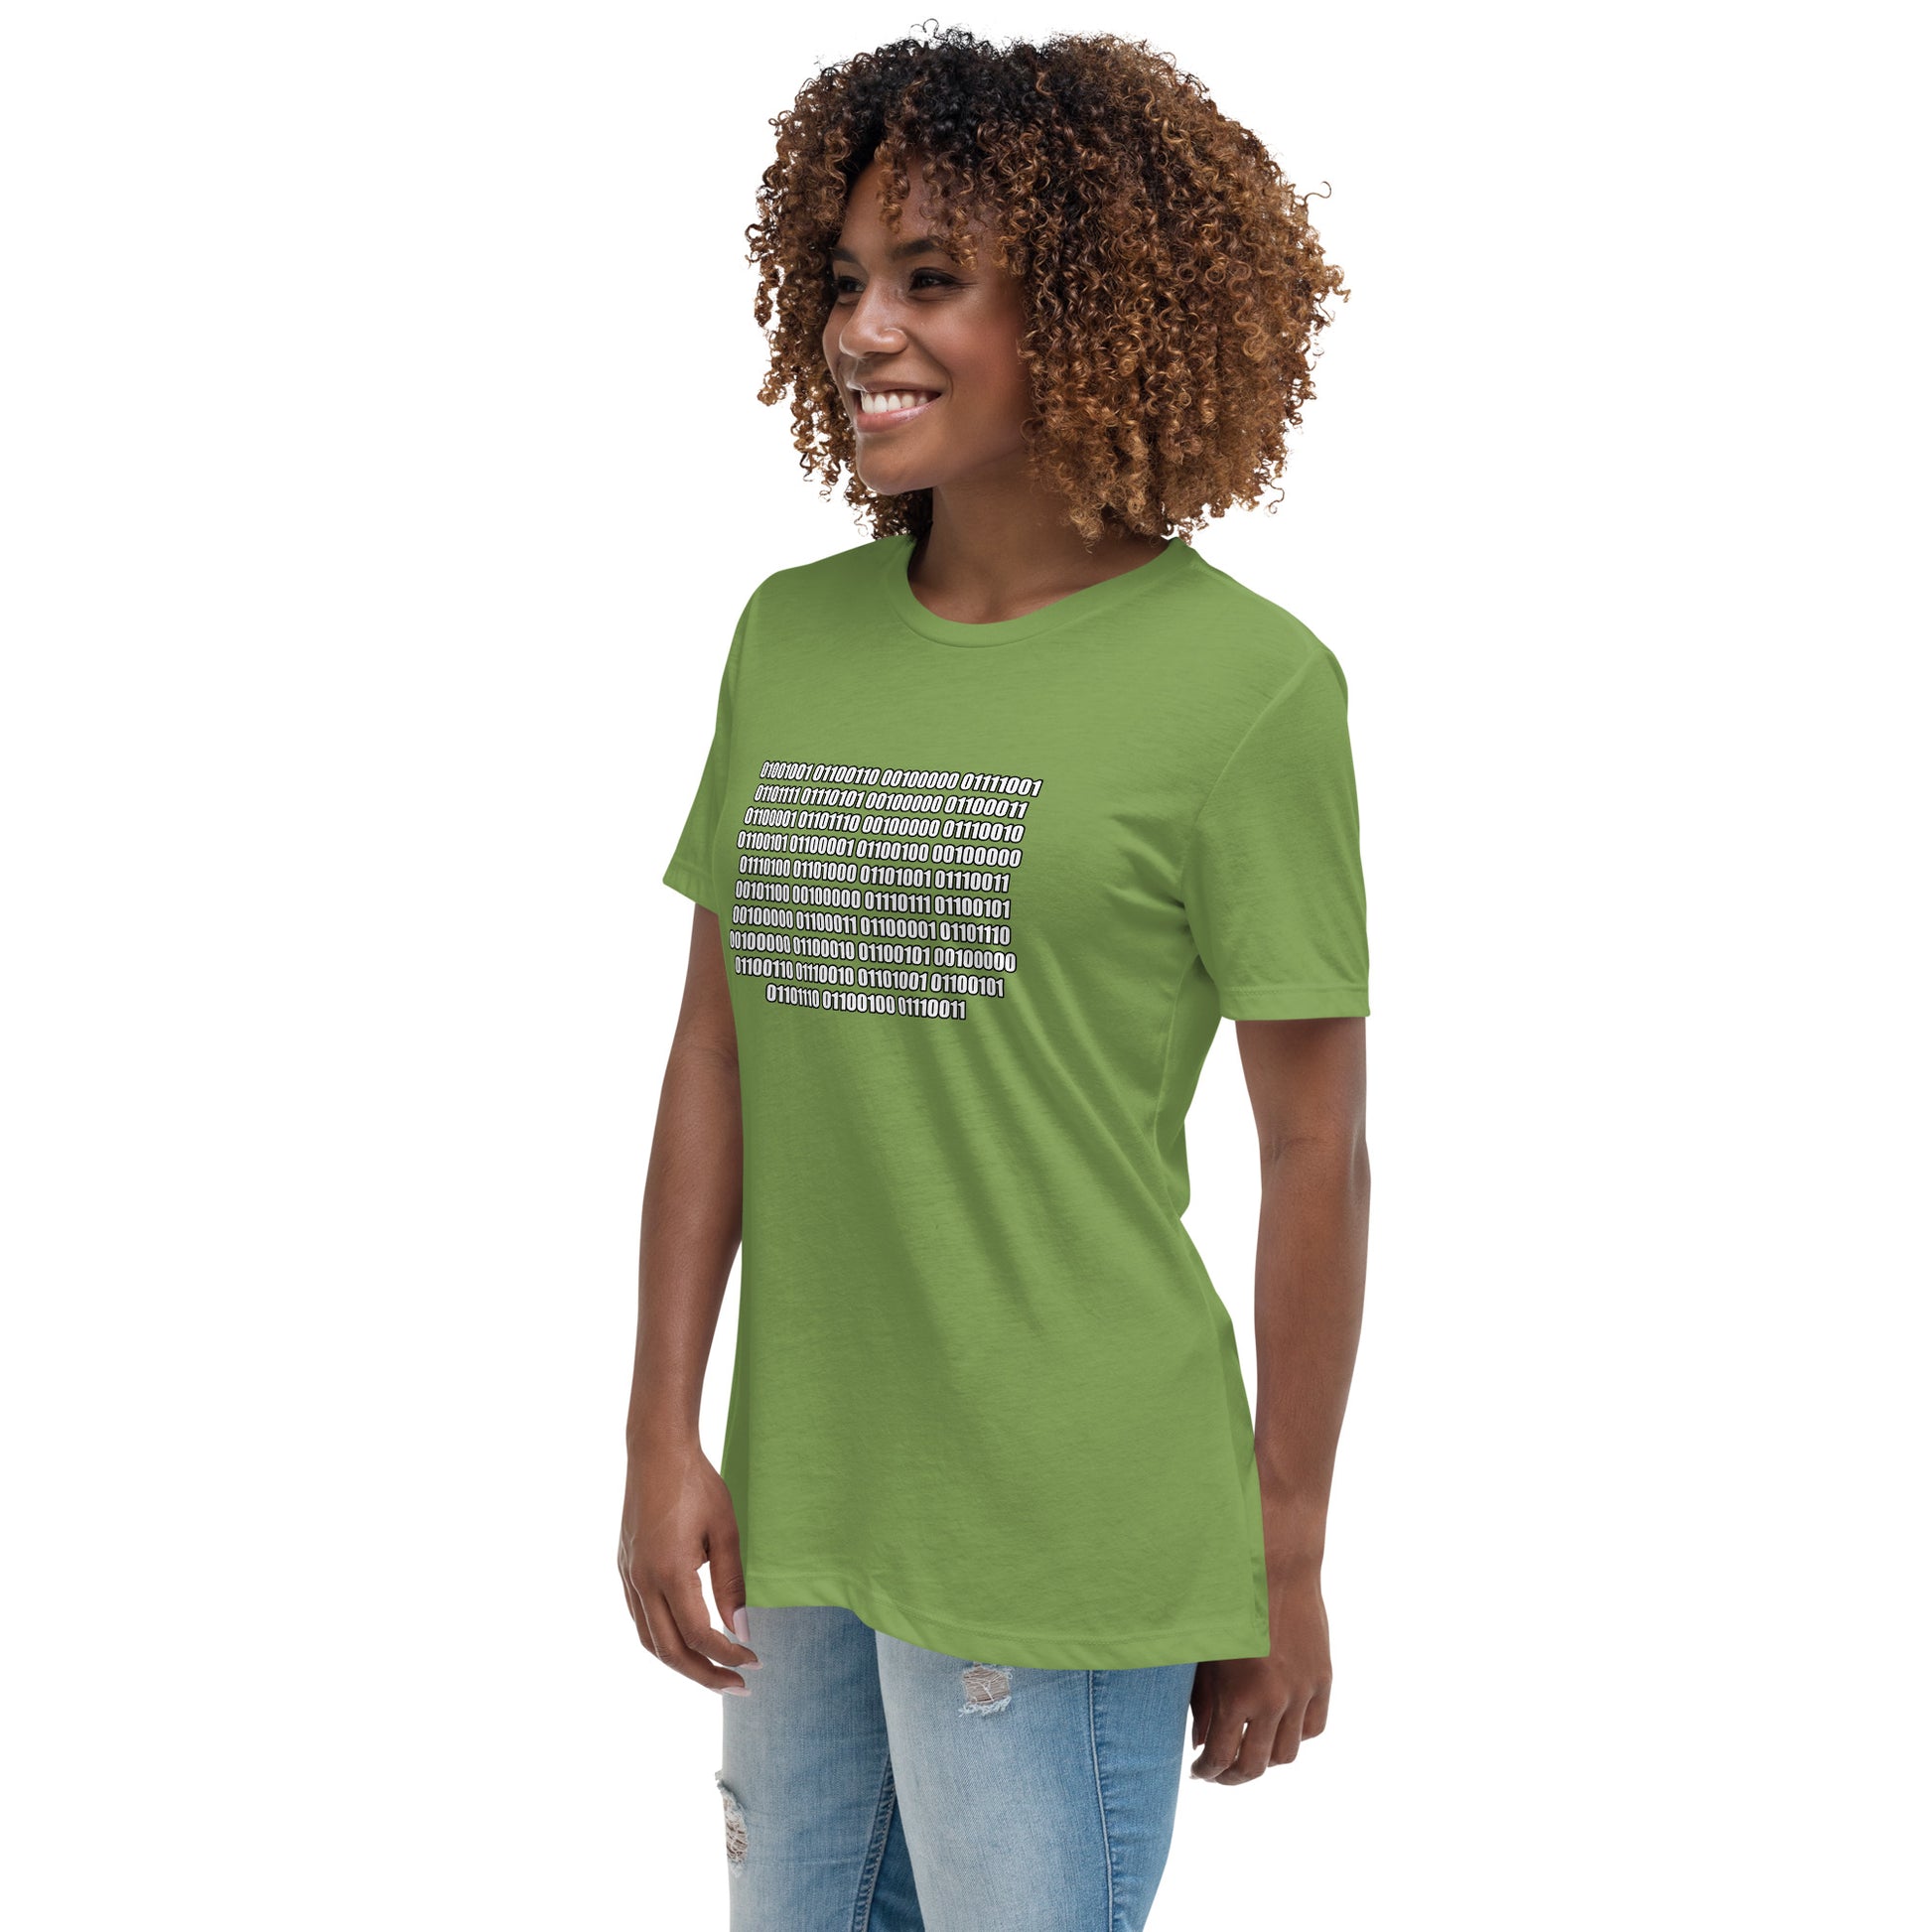 Woman with leaf green t-shirt with binary code "If you can read this"